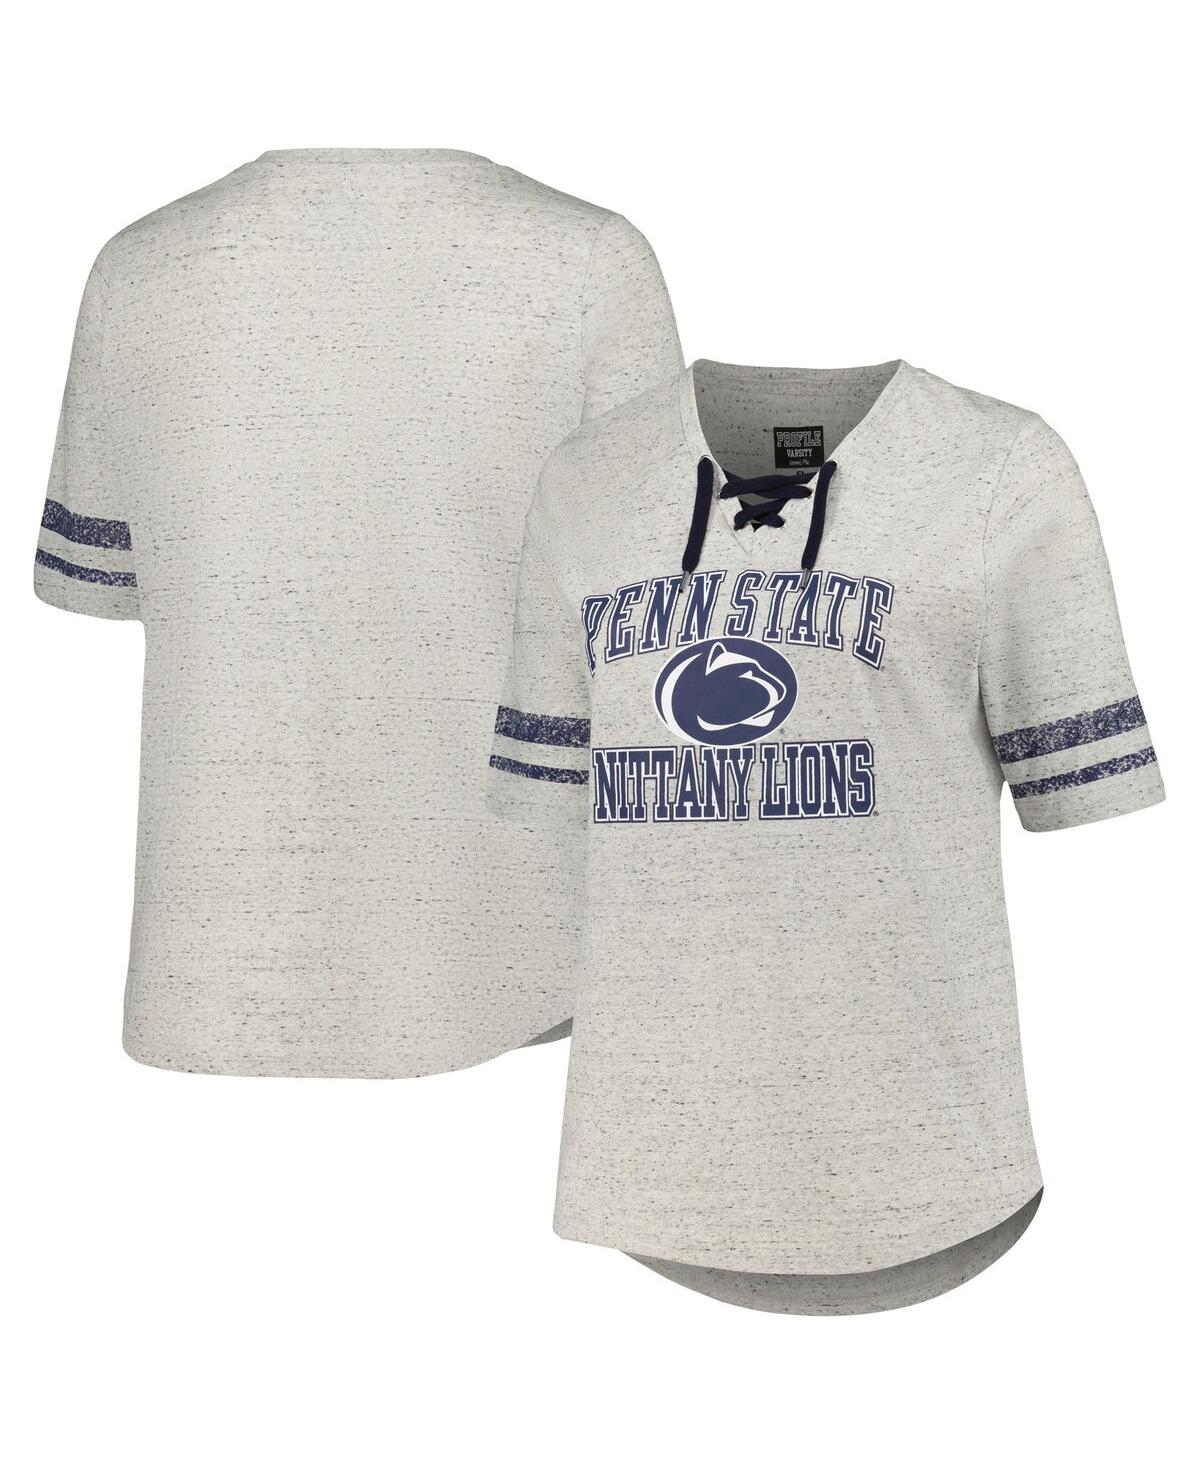 Women's Profile Heather Gray Penn State Nittany Lions Plus Size Striped Lace-Up T-shirt - Heather Gray